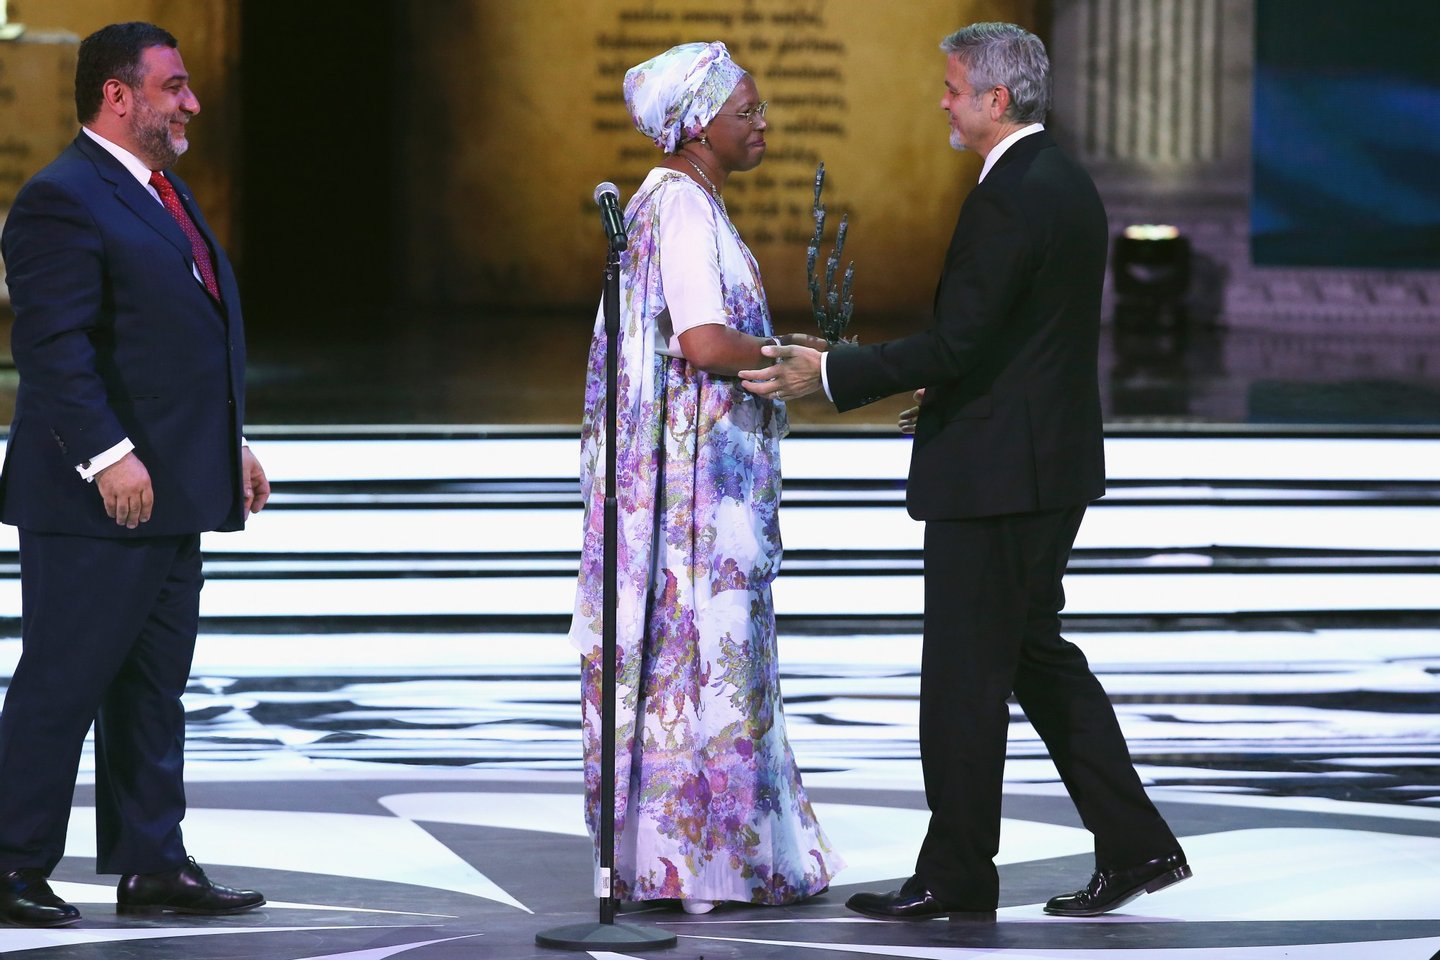 YEREVAN, ARMENIA - APRIL 24:  Aurora Prize Co-Founder Ruben Vardanyan, Aurora Prize finalist and Founder Maison Shalom, Marguerite Barankitse and Aurora Prize  Selection Committee Co-Chair George Clooney on April 24, 2016 in Yerevan, Armenia.  (Photo by Andreas Rentz/Getty Images for 100 Lives)